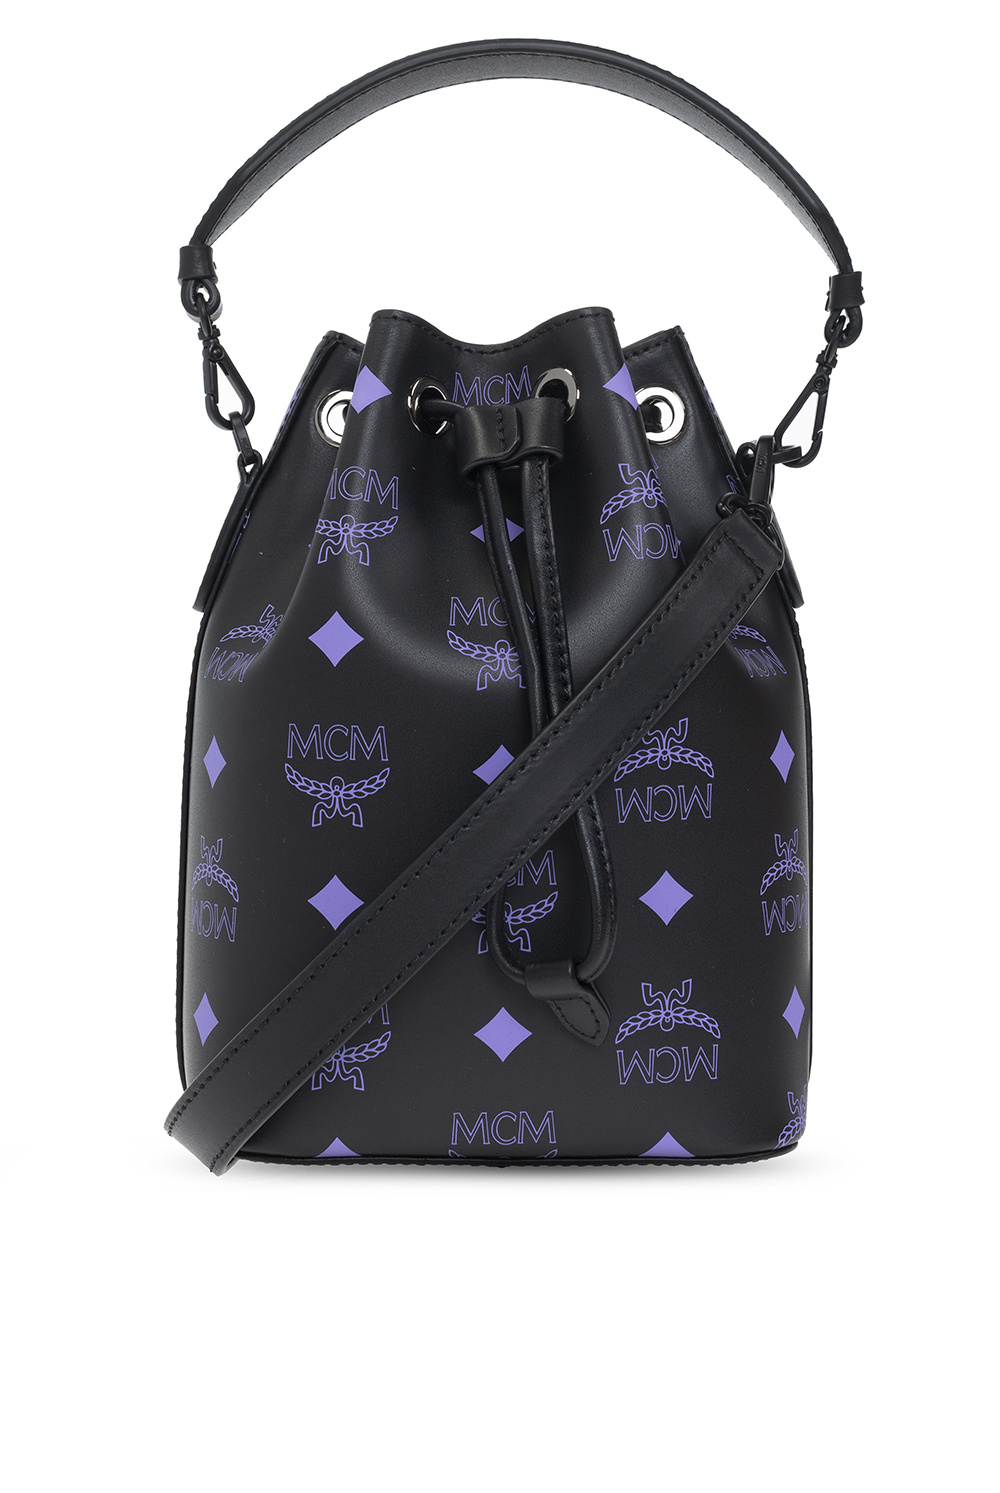 Long Bags for Women from MCM